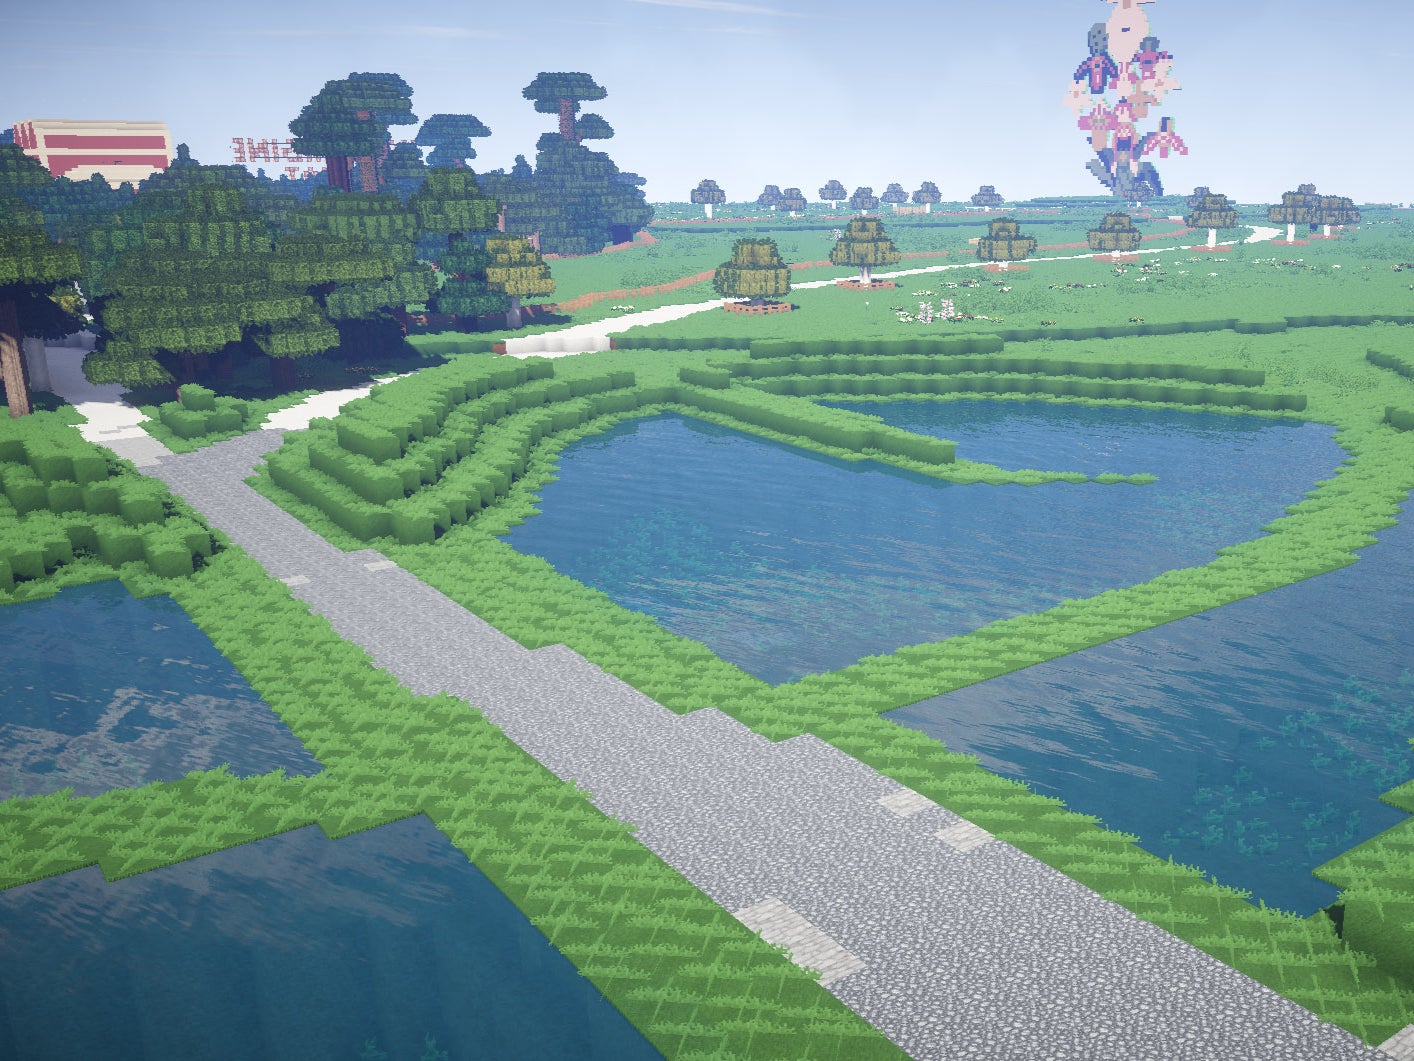 Jupiter Artland as it has been recreated in the popular video game Minecraft